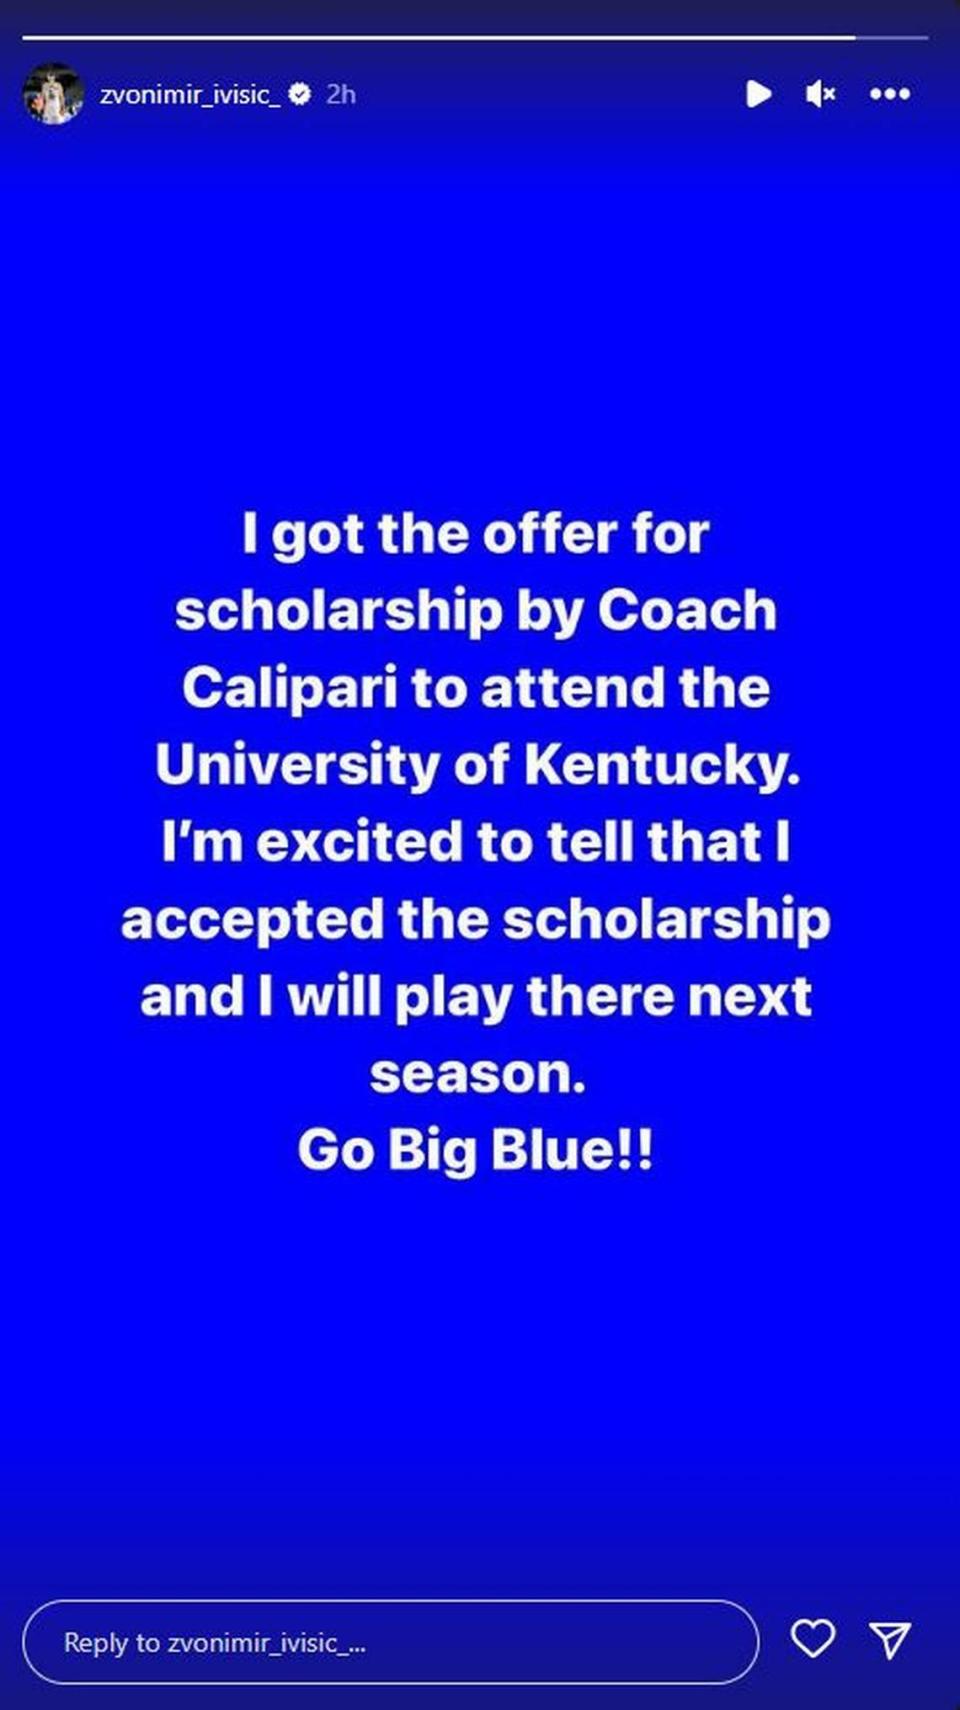 Zvonimir Ivisic posted his commitment to Kentucky on his Instagram account on Tuesday morning.